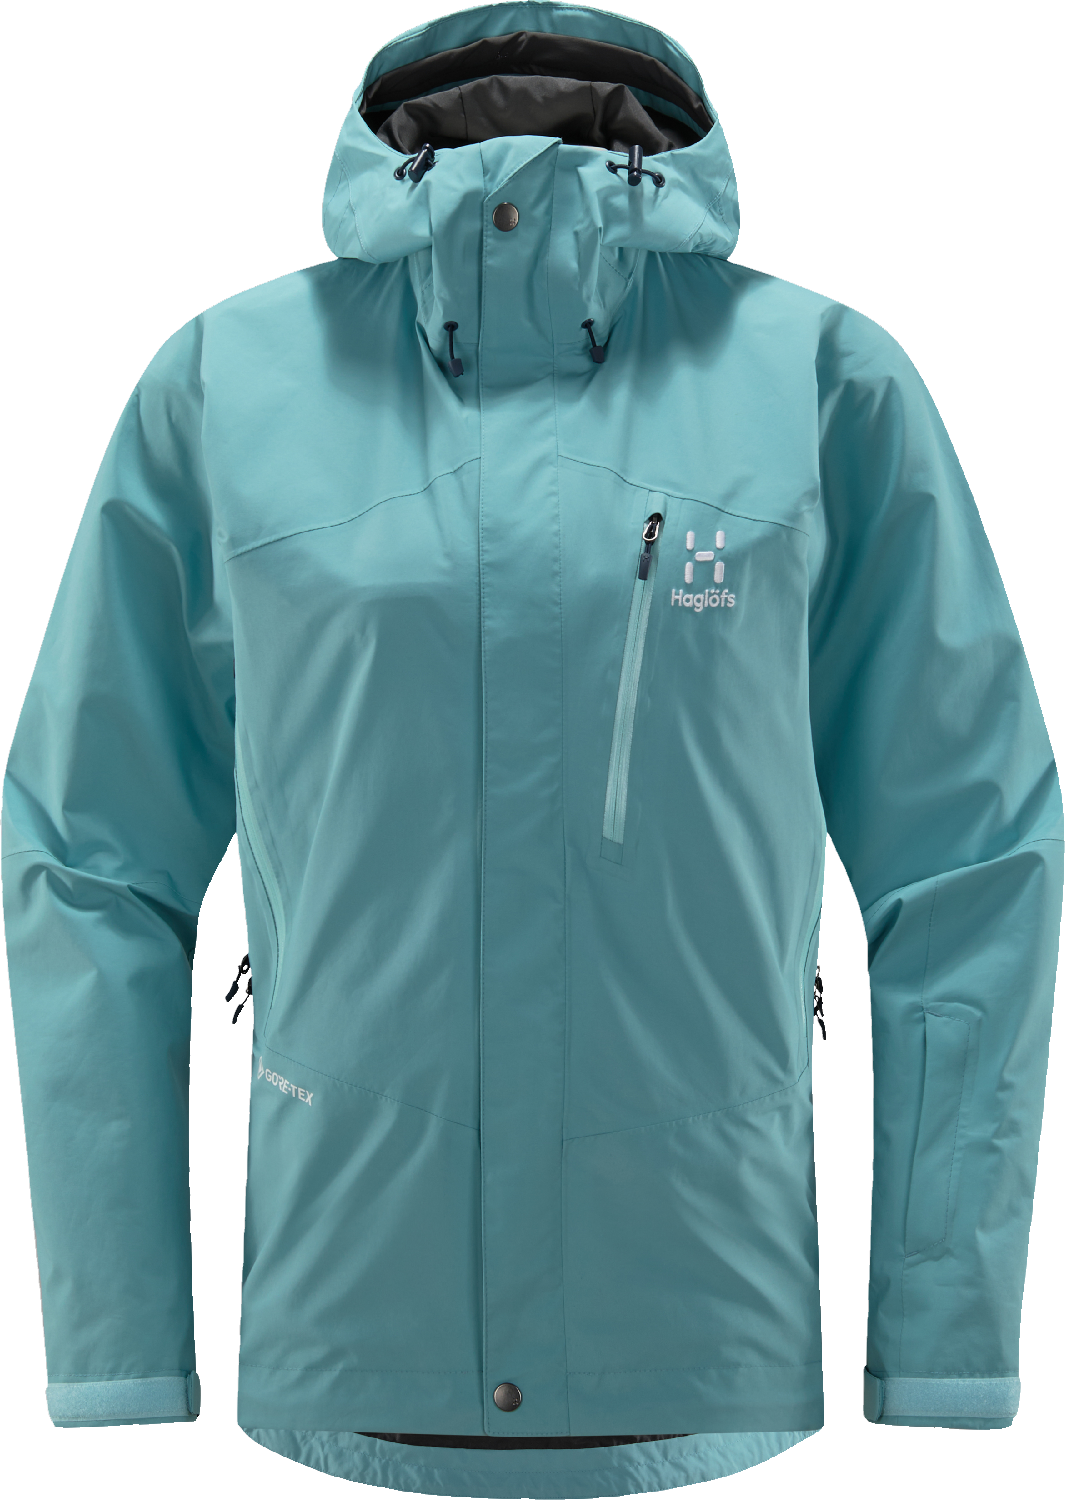 Women's Astral GORE-TEX Jacket Frost Blue